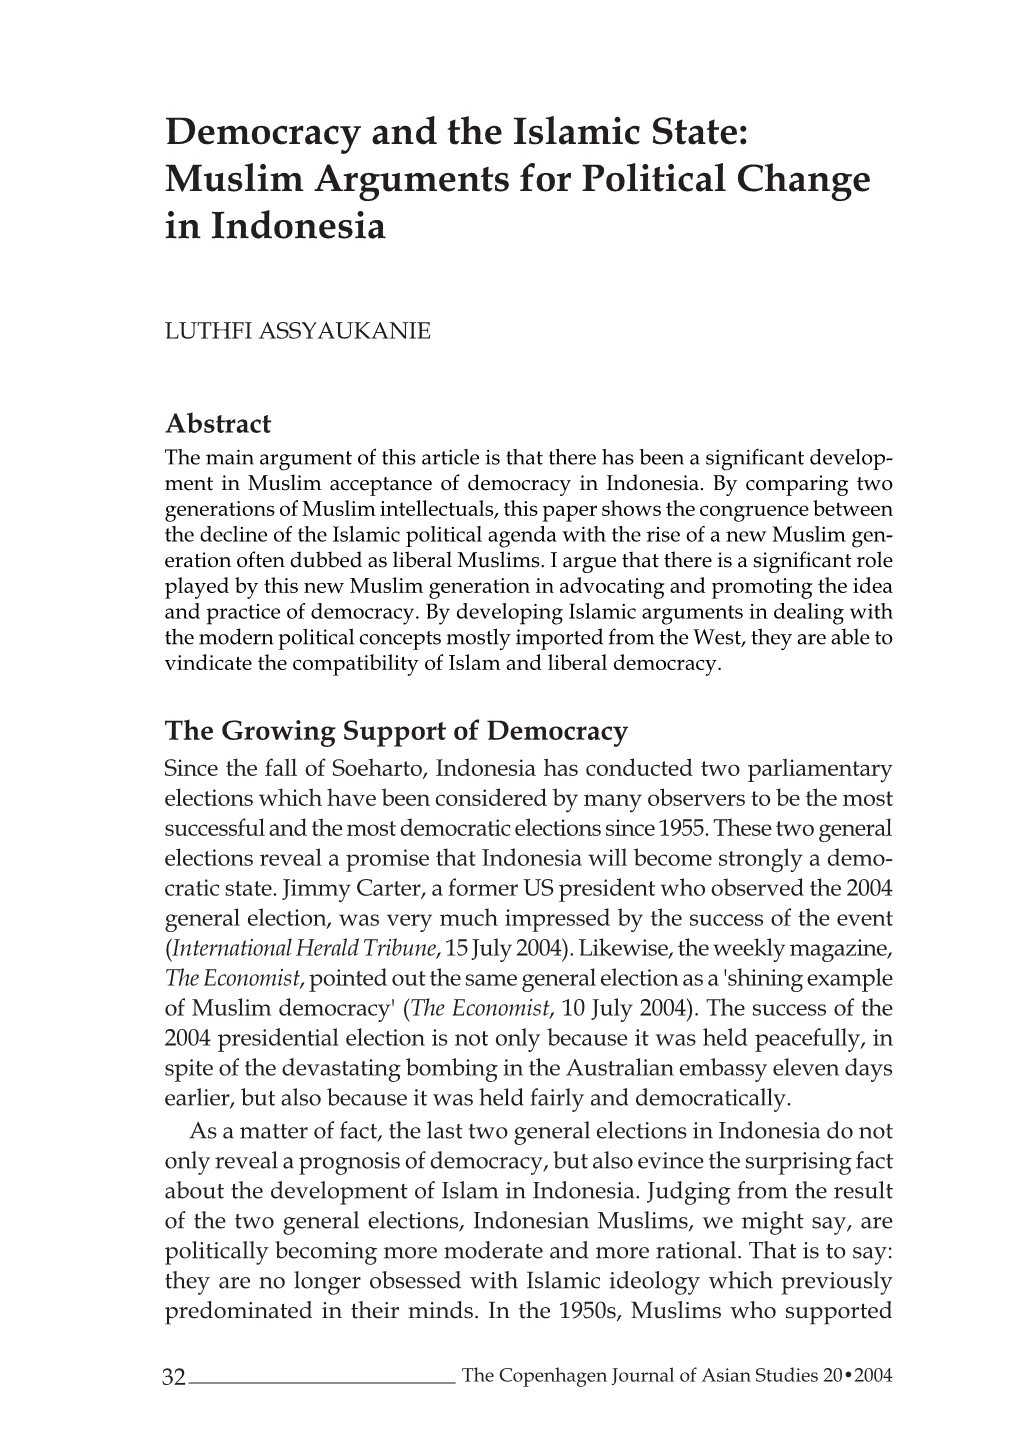 Democracy and the Islamic State: Muslim Arguments for Political Change in Indonesia